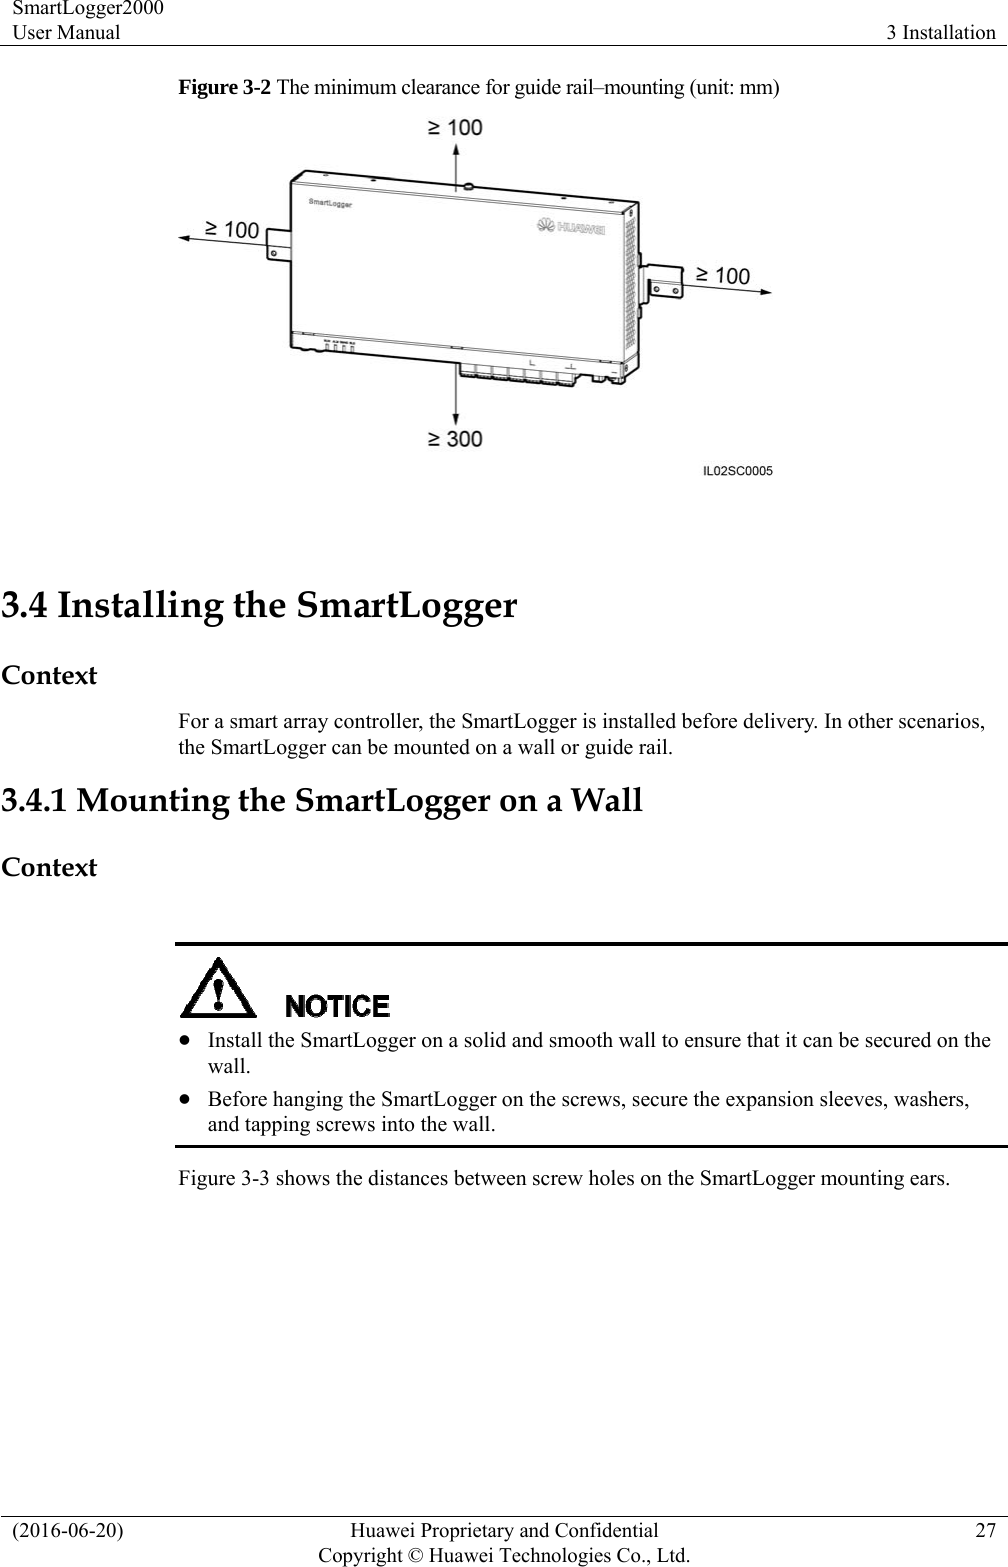 SmartLogger2000 User Manual  3 Installation (2016-06-20)  Huawei Proprietary and Confidential         Copyright © Huawei Technologies Co., Ltd.27 Figure 3-2 The minimum clearance for guide rail–mounting (unit: mm)     3.4 Installing the SmartLogger Context For a smart array controller, the SmartLogger is installed before delivery. In other scenarios, the SmartLogger can be mounted on a wall or guide rail. 3.4.1 Mounting the SmartLogger on a Wall Context    Install the SmartLogger on a solid and smooth wall to ensure that it can be secured on the wall.  Before hanging the SmartLogger on the screws, secure the expansion sleeves, washers, and tapping screws into the wall.   Figure 3-3 shows the distances between screw holes on the SmartLogger mounting ears. 